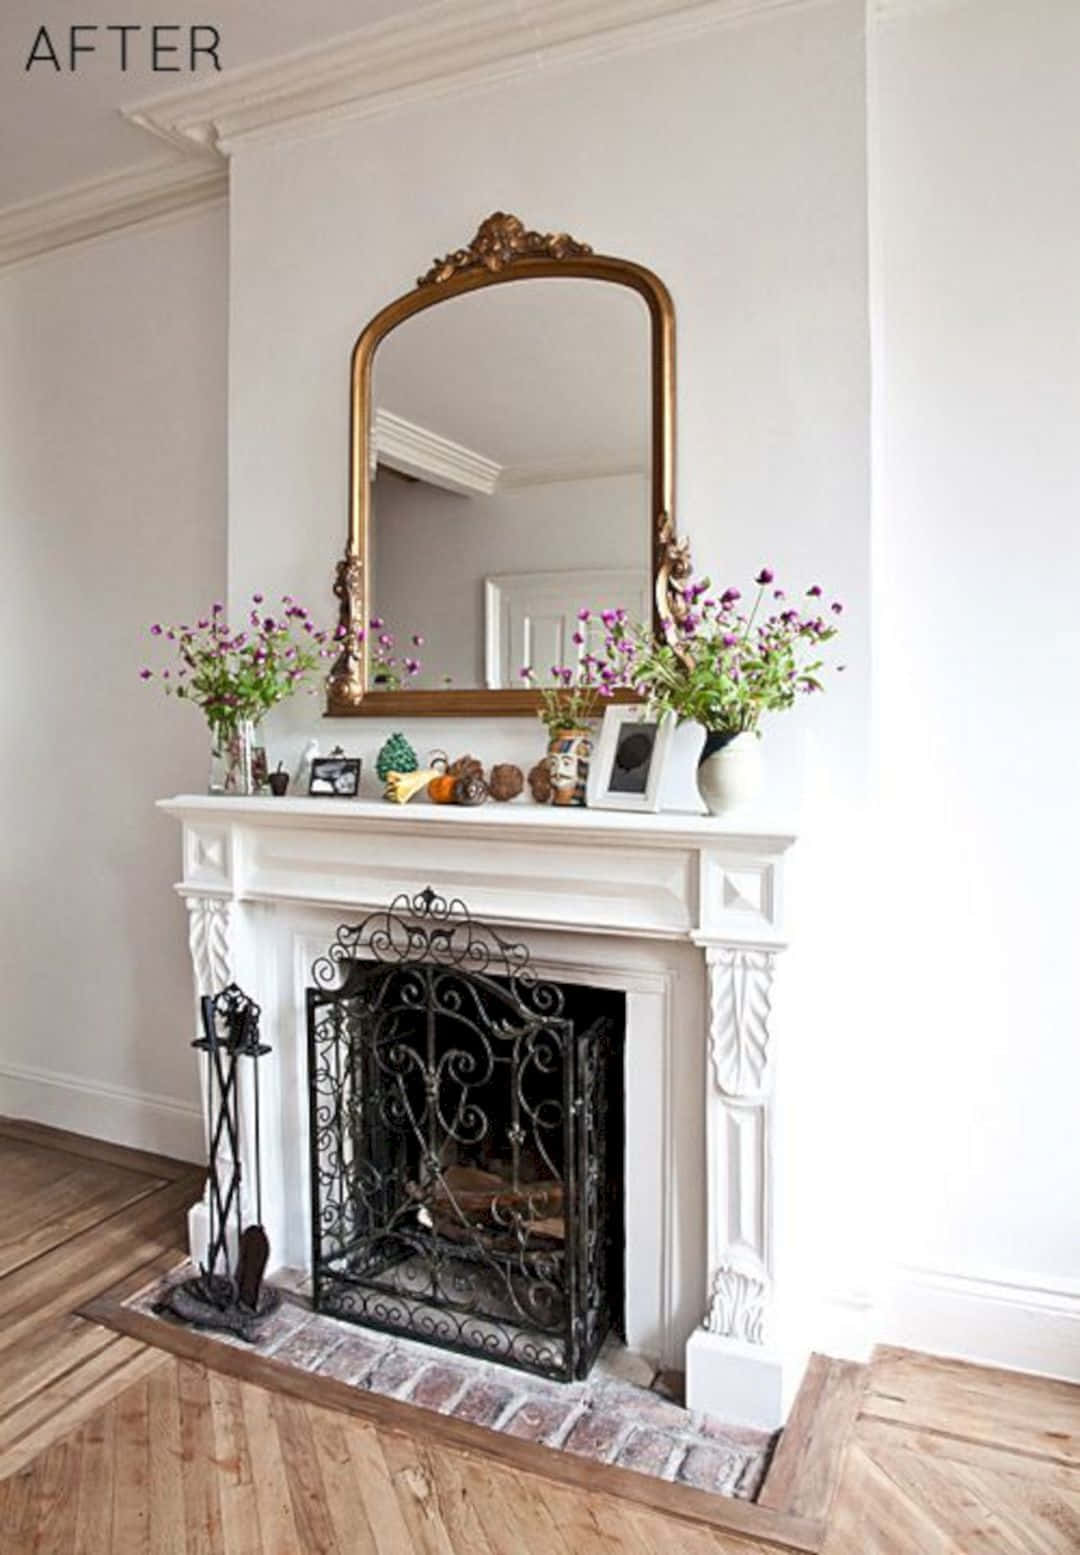 A Fireplace With A Mirror And Flowers In It